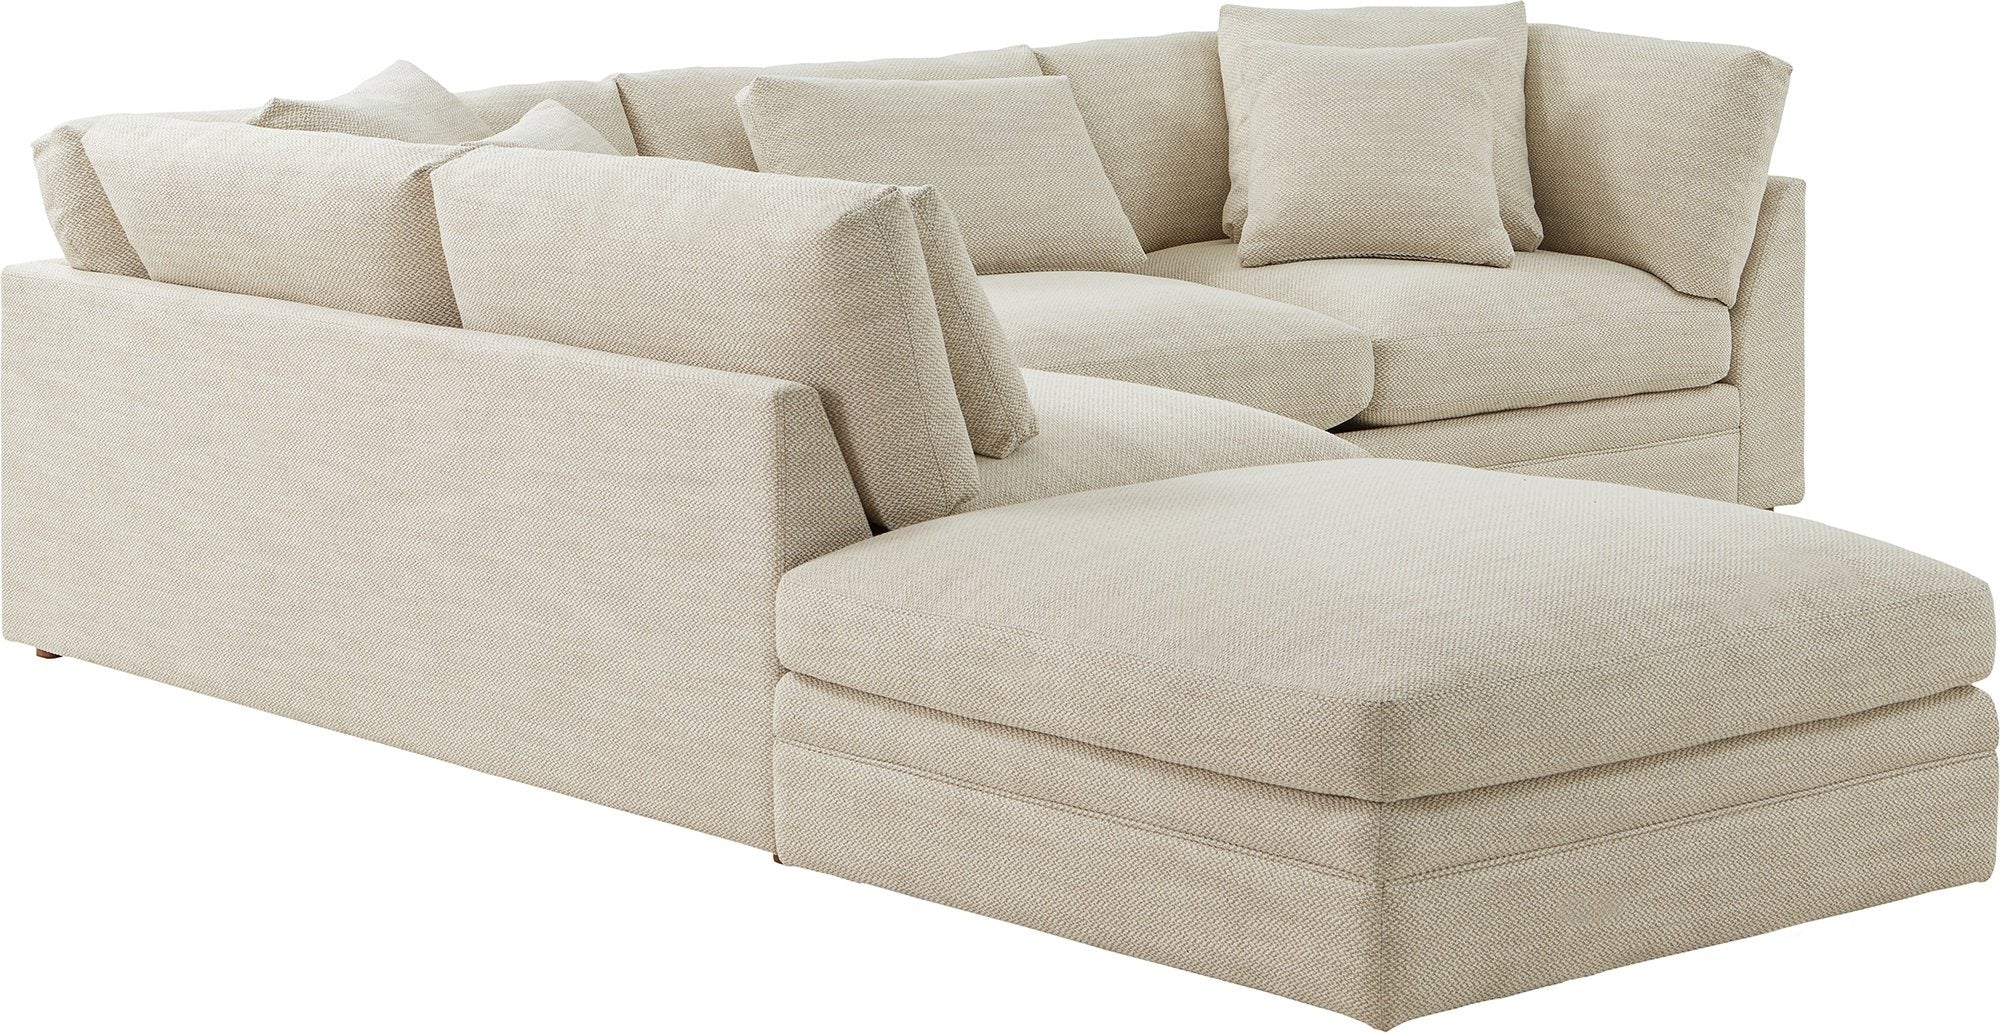 Feel Good Sectional with Ottoman, Left, Oyster - Image 4